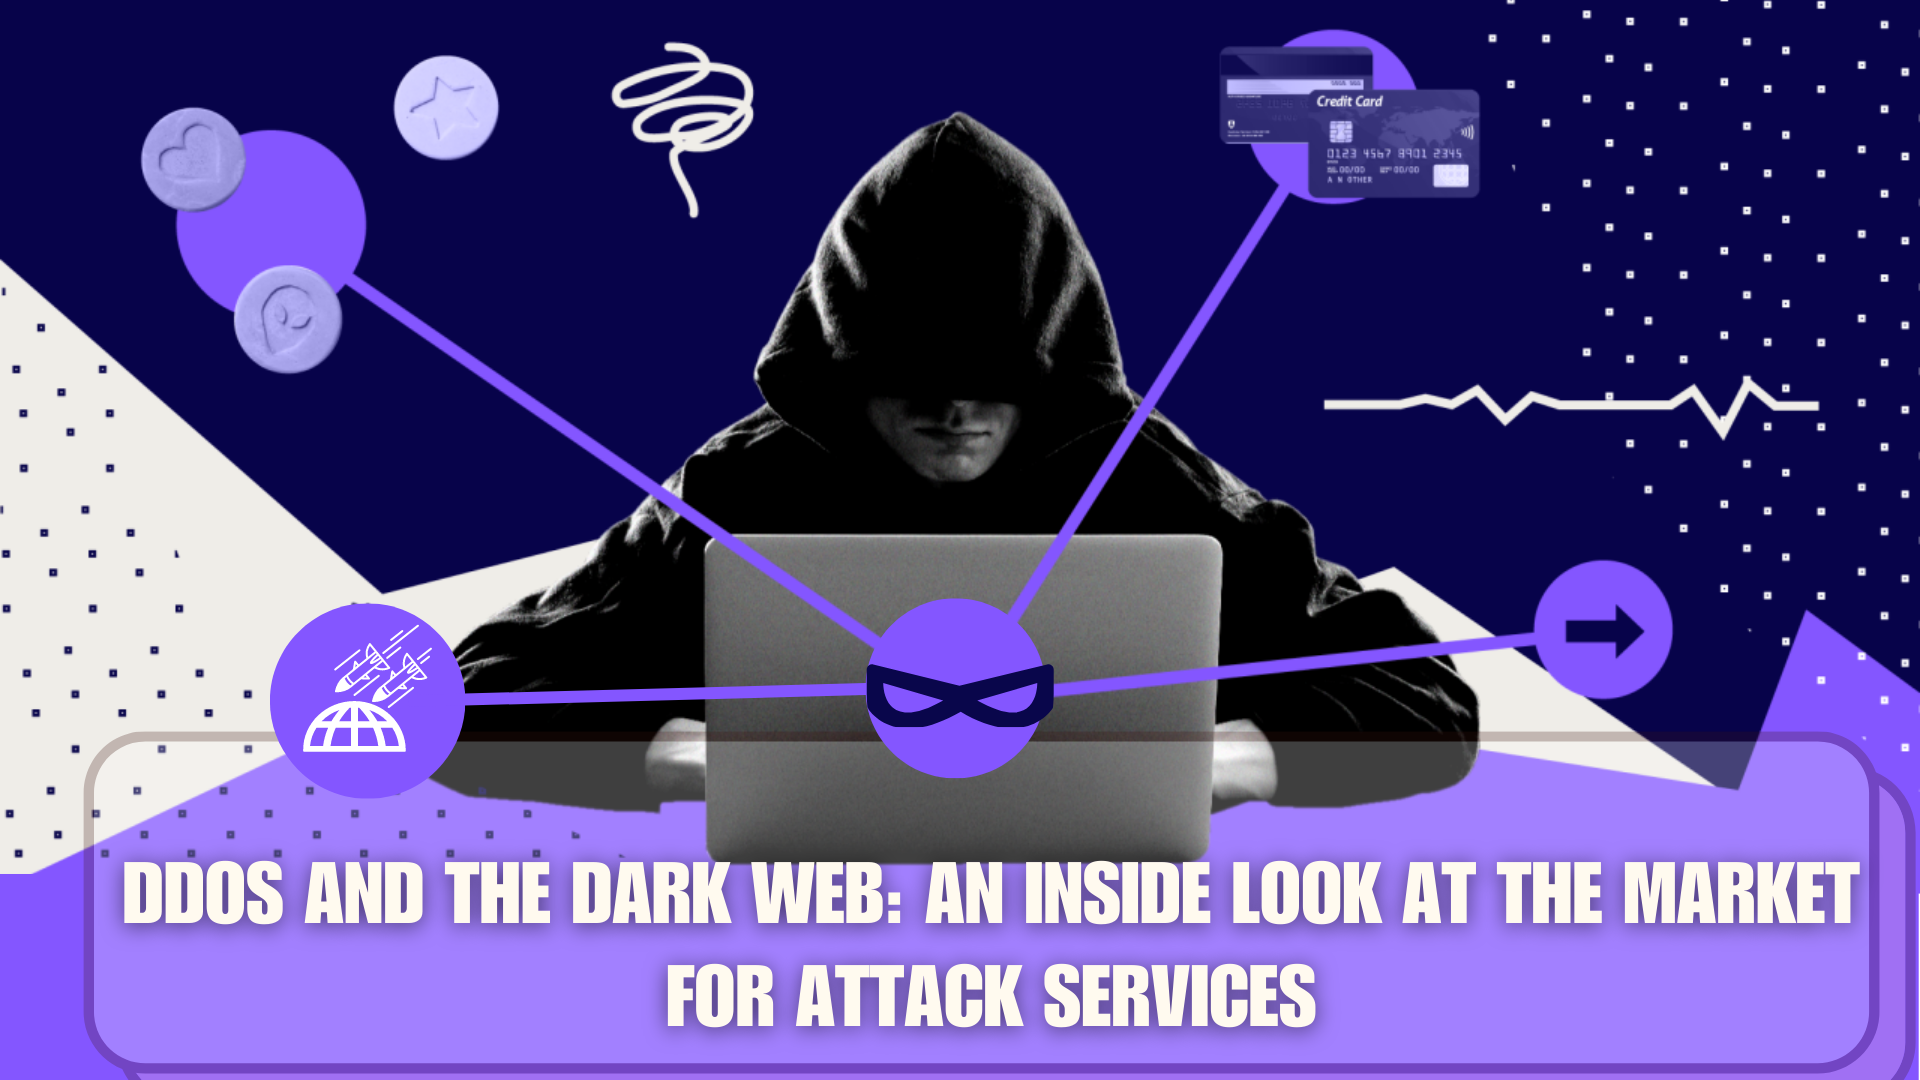 DDoS and the Dark Web An Inside Look at the Market for Attack Services (1)